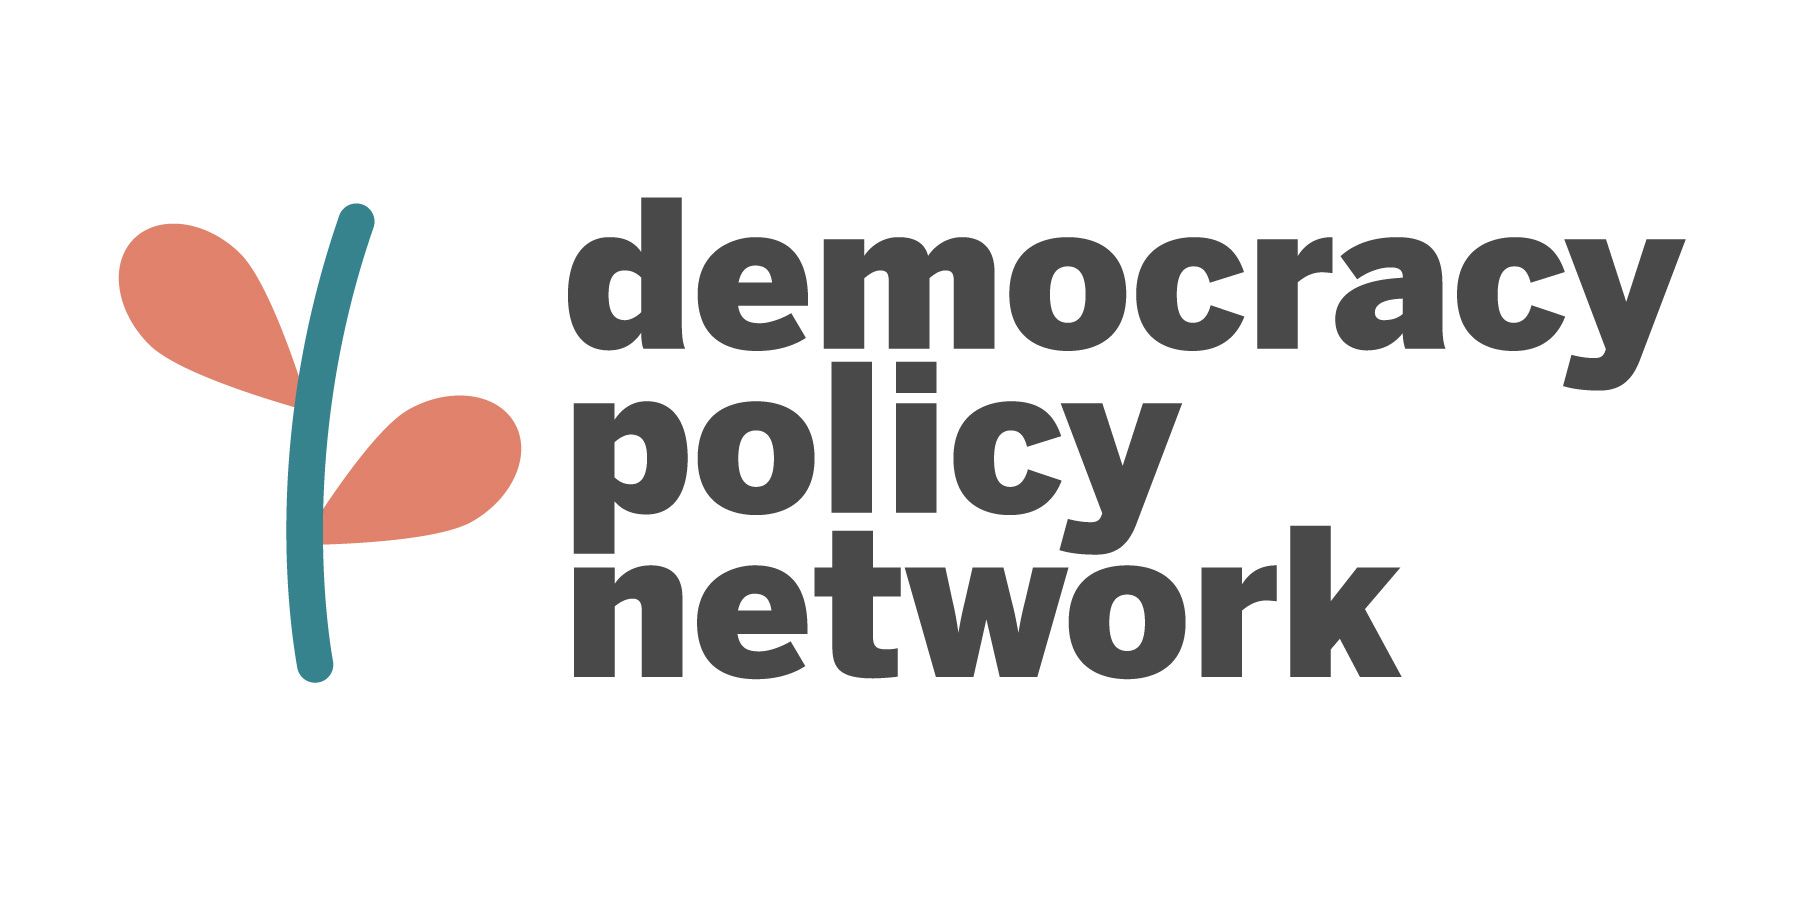 The Democracy Policy Network's full launch